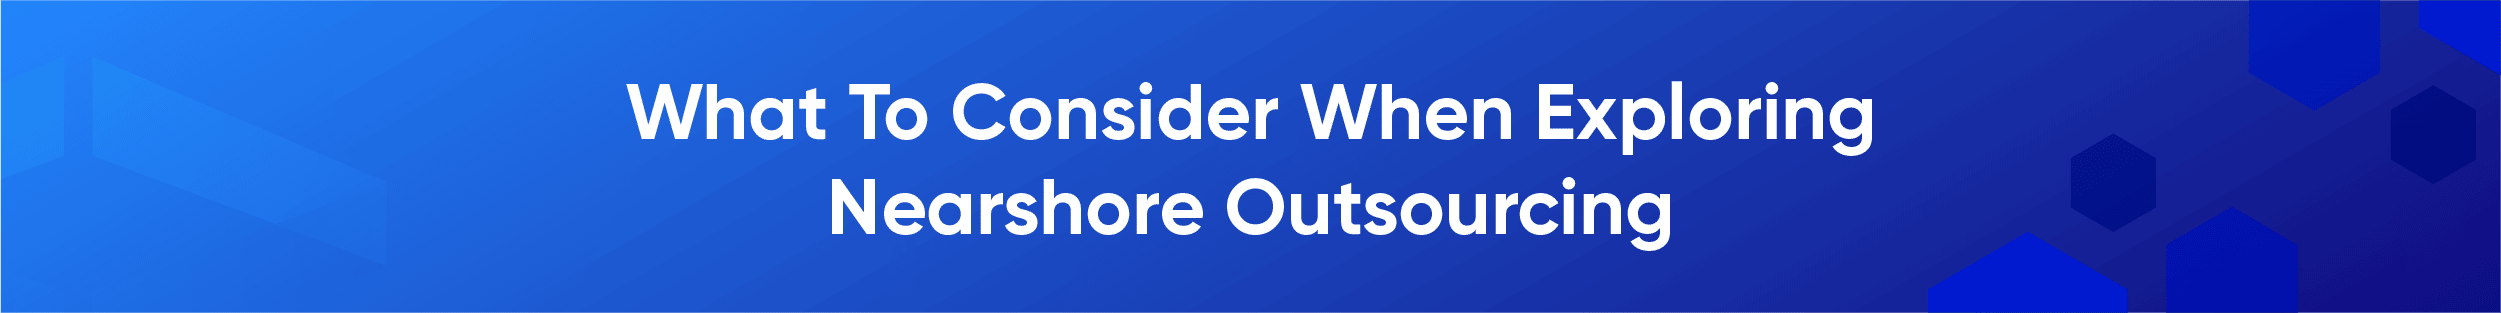 What To Consider When Exploring Nearshore Outsourcing